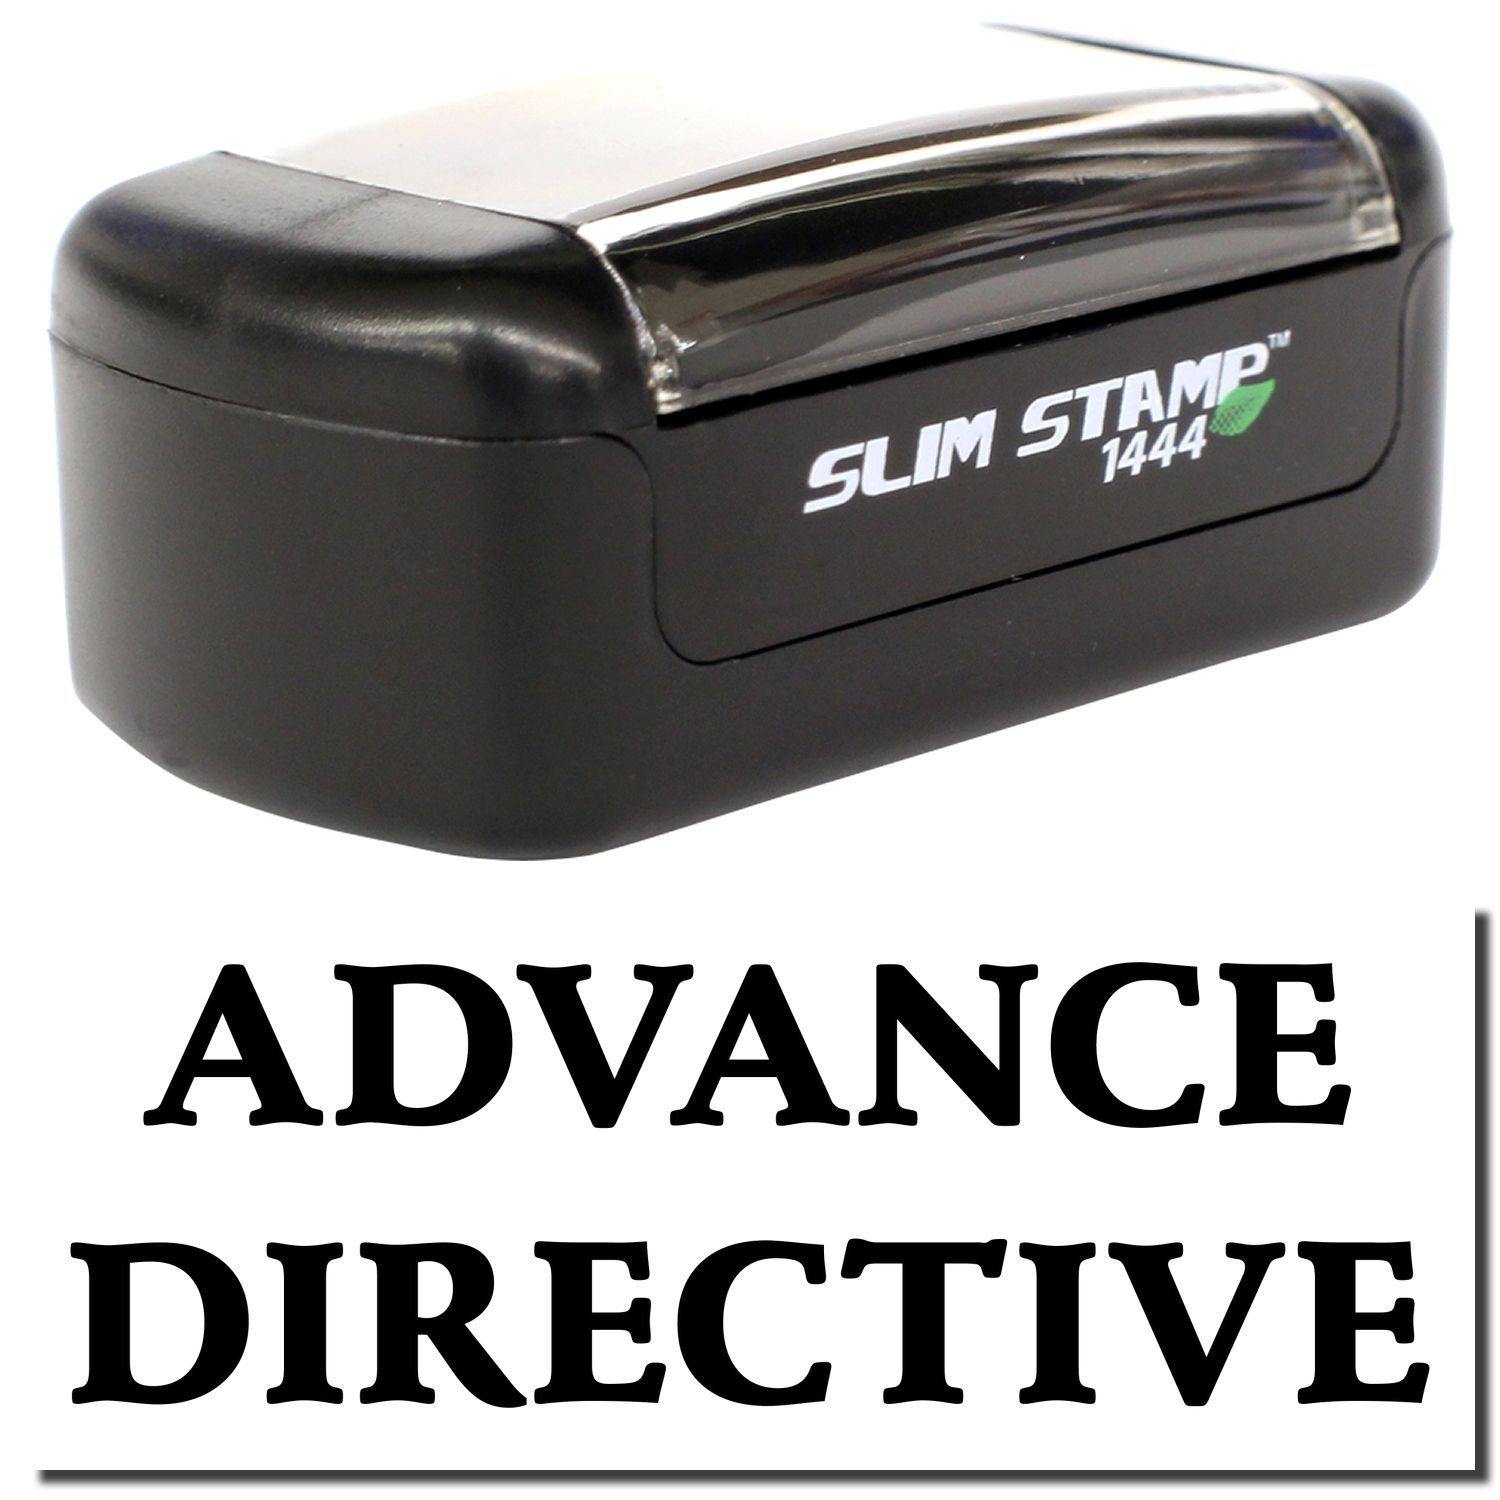 A stock office pre-inked stamp with a stamped image showing how the text "ADVANCE DIRECTIVE" is displayed after stamping.